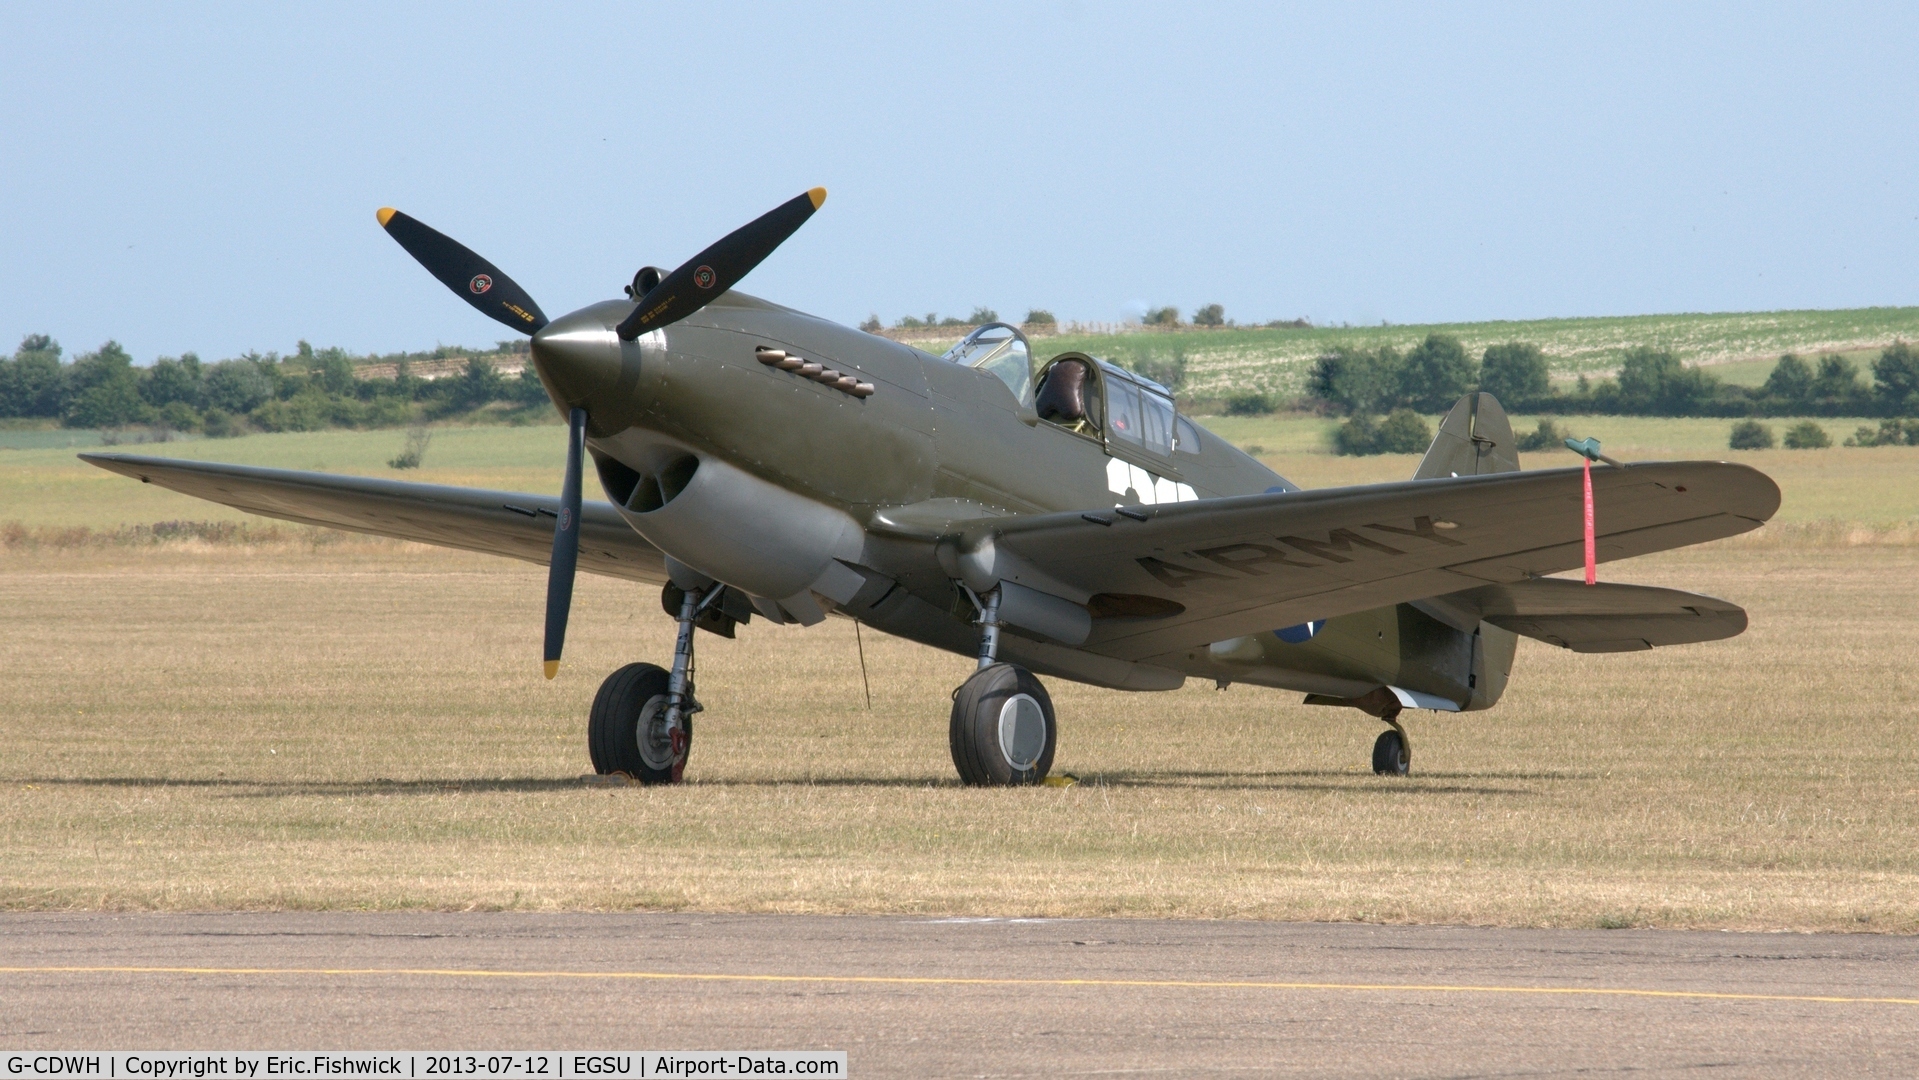 G-CDWH, 1941 Curtiss P-40B Warhawk C/N 16073, 3. G-CDWH on the eve of Flying Legends Air Show, Duxford - July 2013.